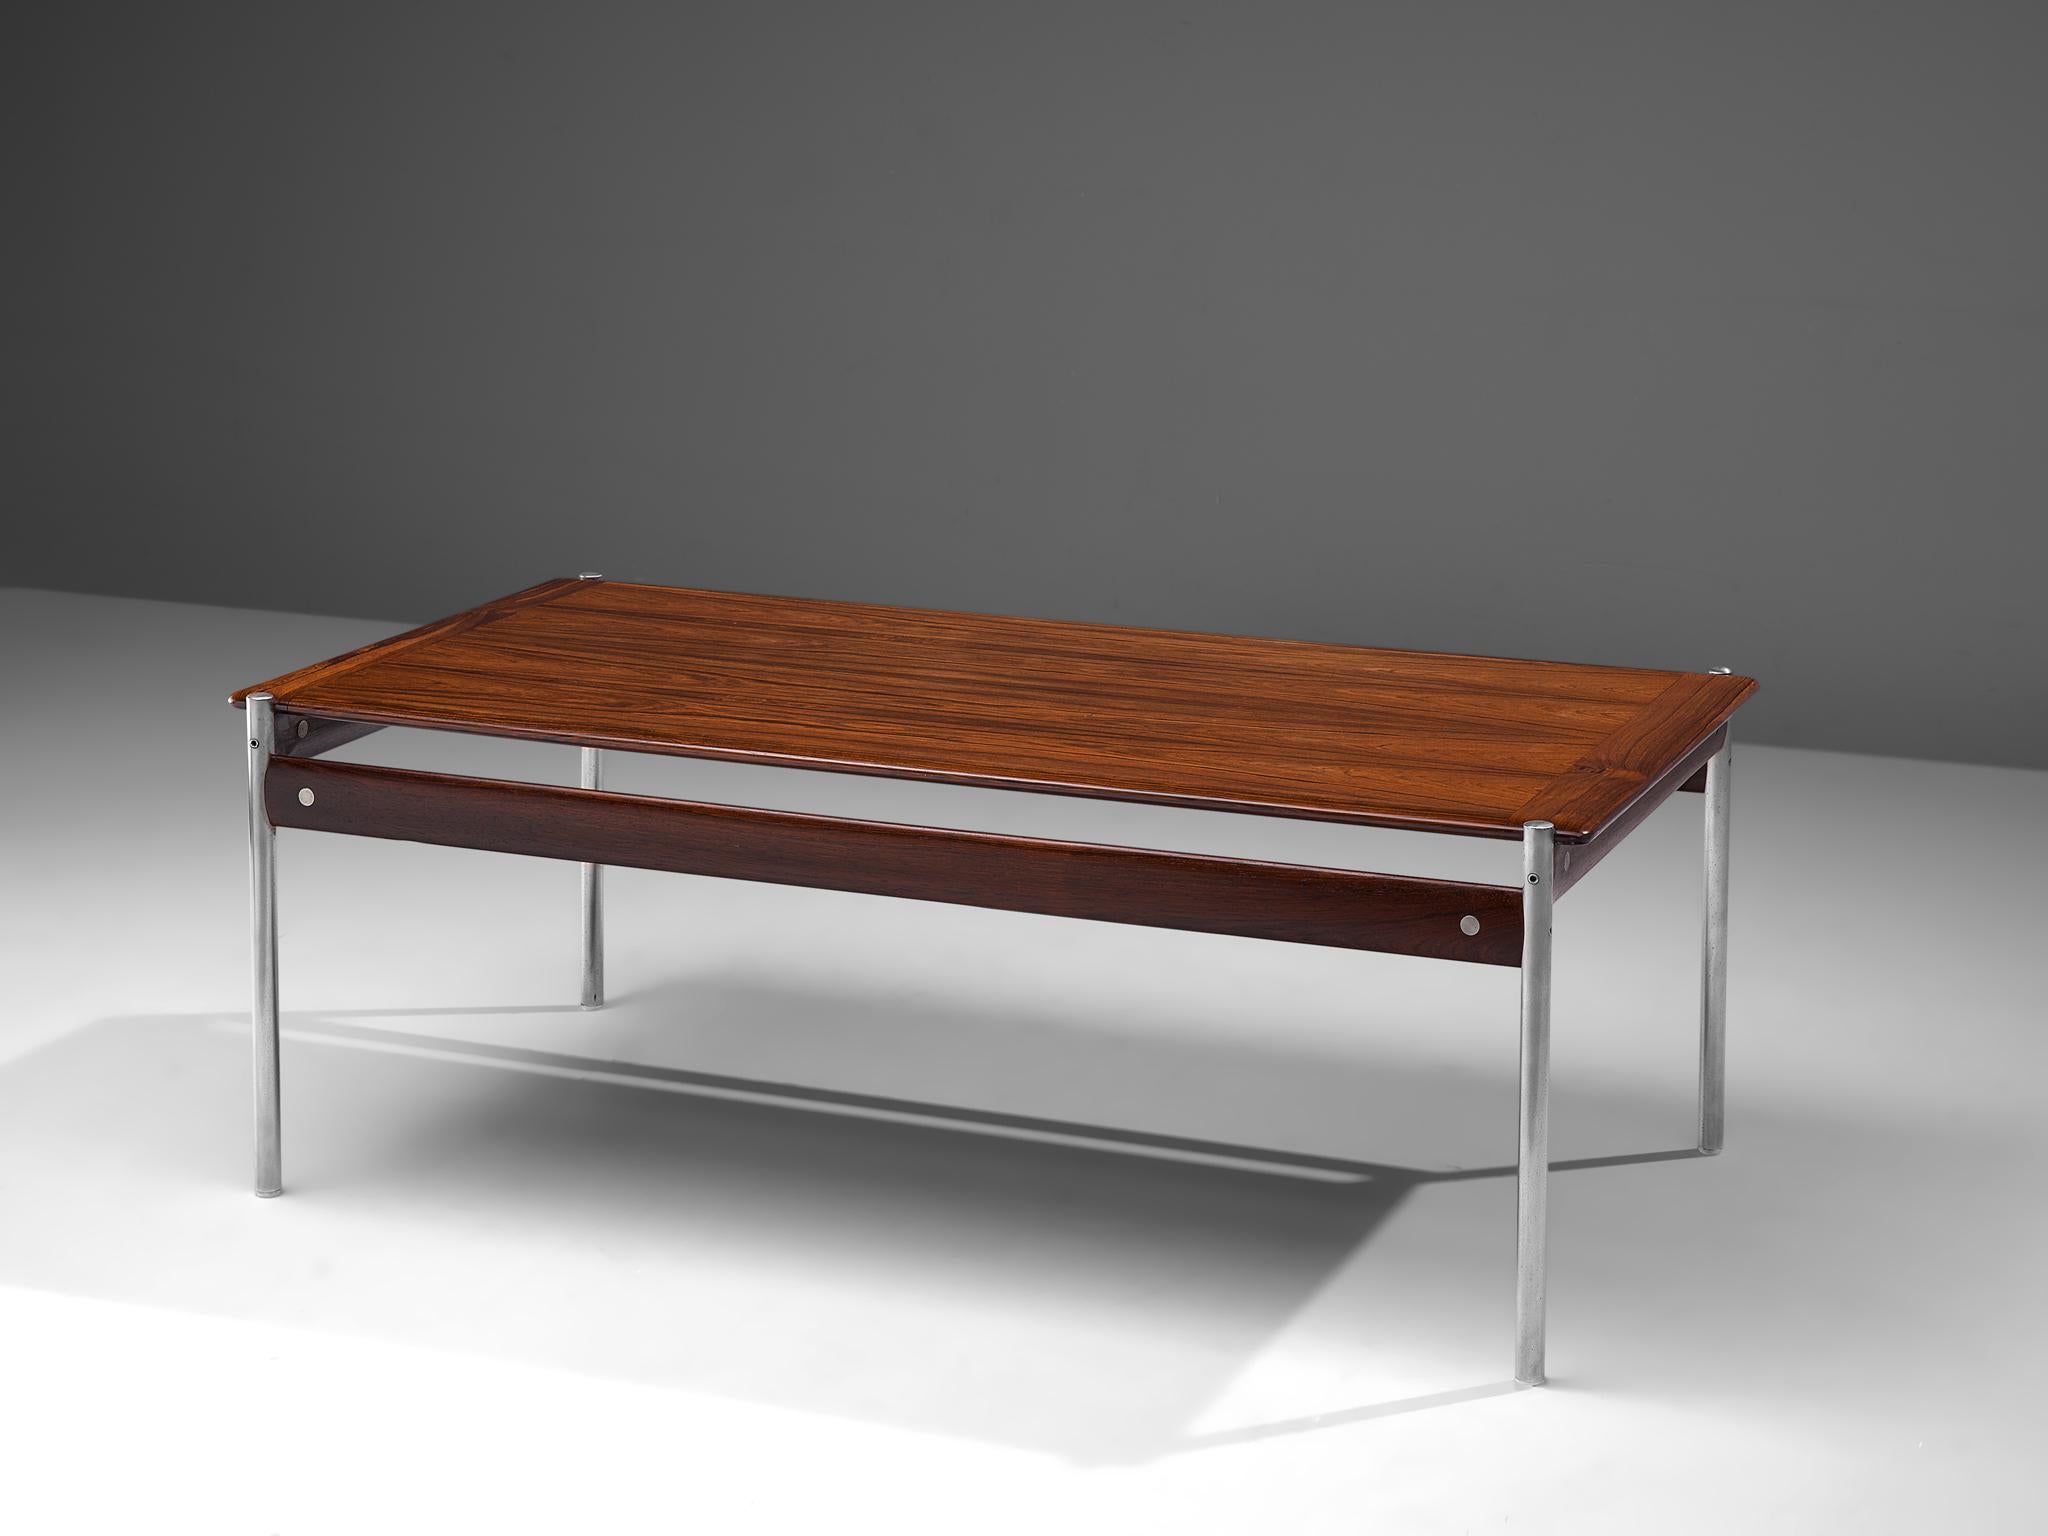 Sven Ivar Dysthe for Dokka Mobler, cocktail table model 1001, rosewood and steel, Norway, 1959.

Stately coffee table executed in high quality rosewood and with tubular steel legs. The table is designed by Sven Ivar Dysthe, being part of the 1001